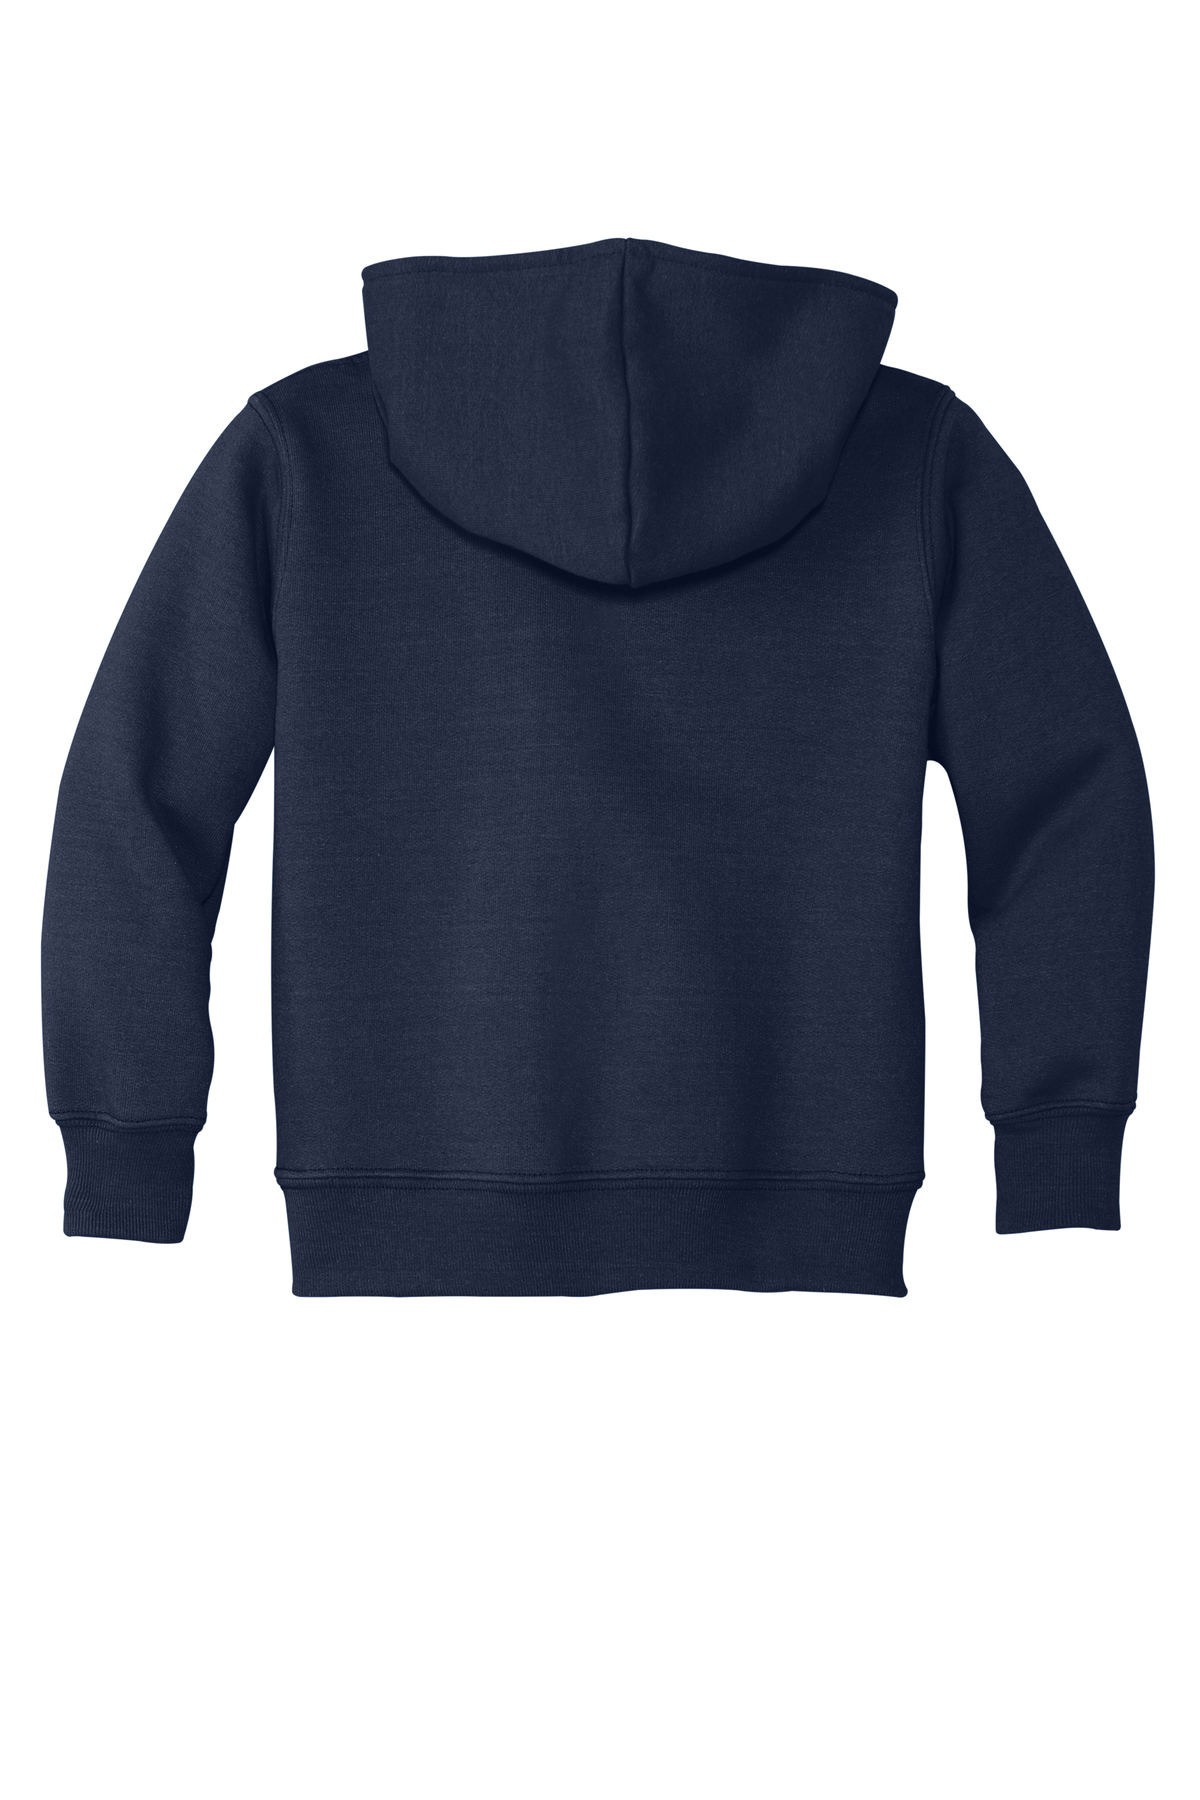 Port & Company Company Product Hooded | Toddler Sweatshirt Port | Pullover Fleece Core 